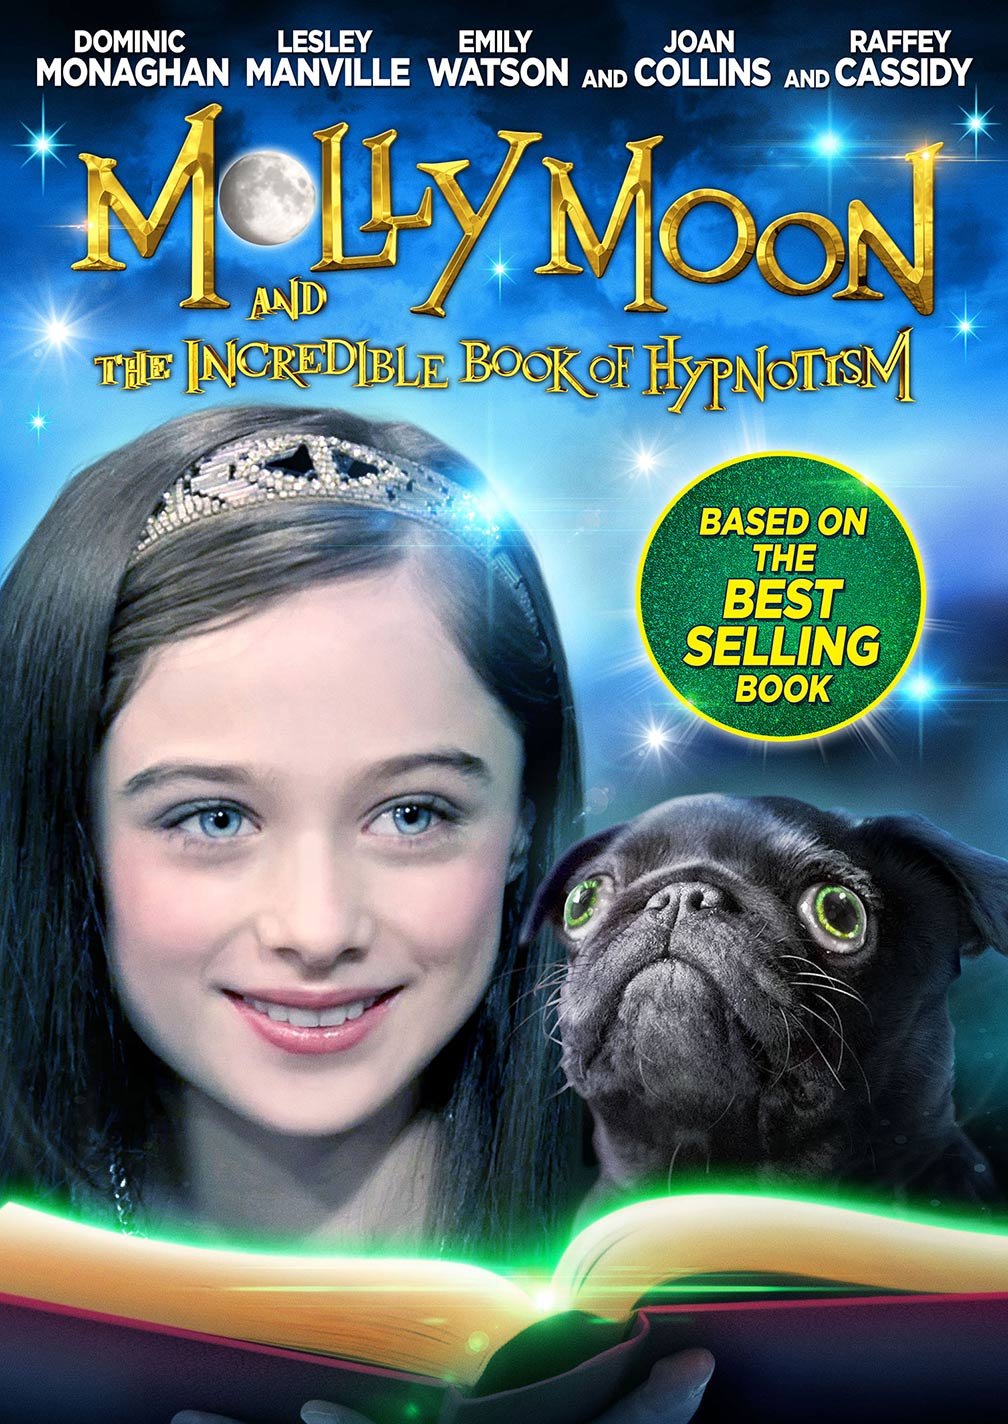 L'affiche du film Molly Moon: Incredible Book of Hypnotism